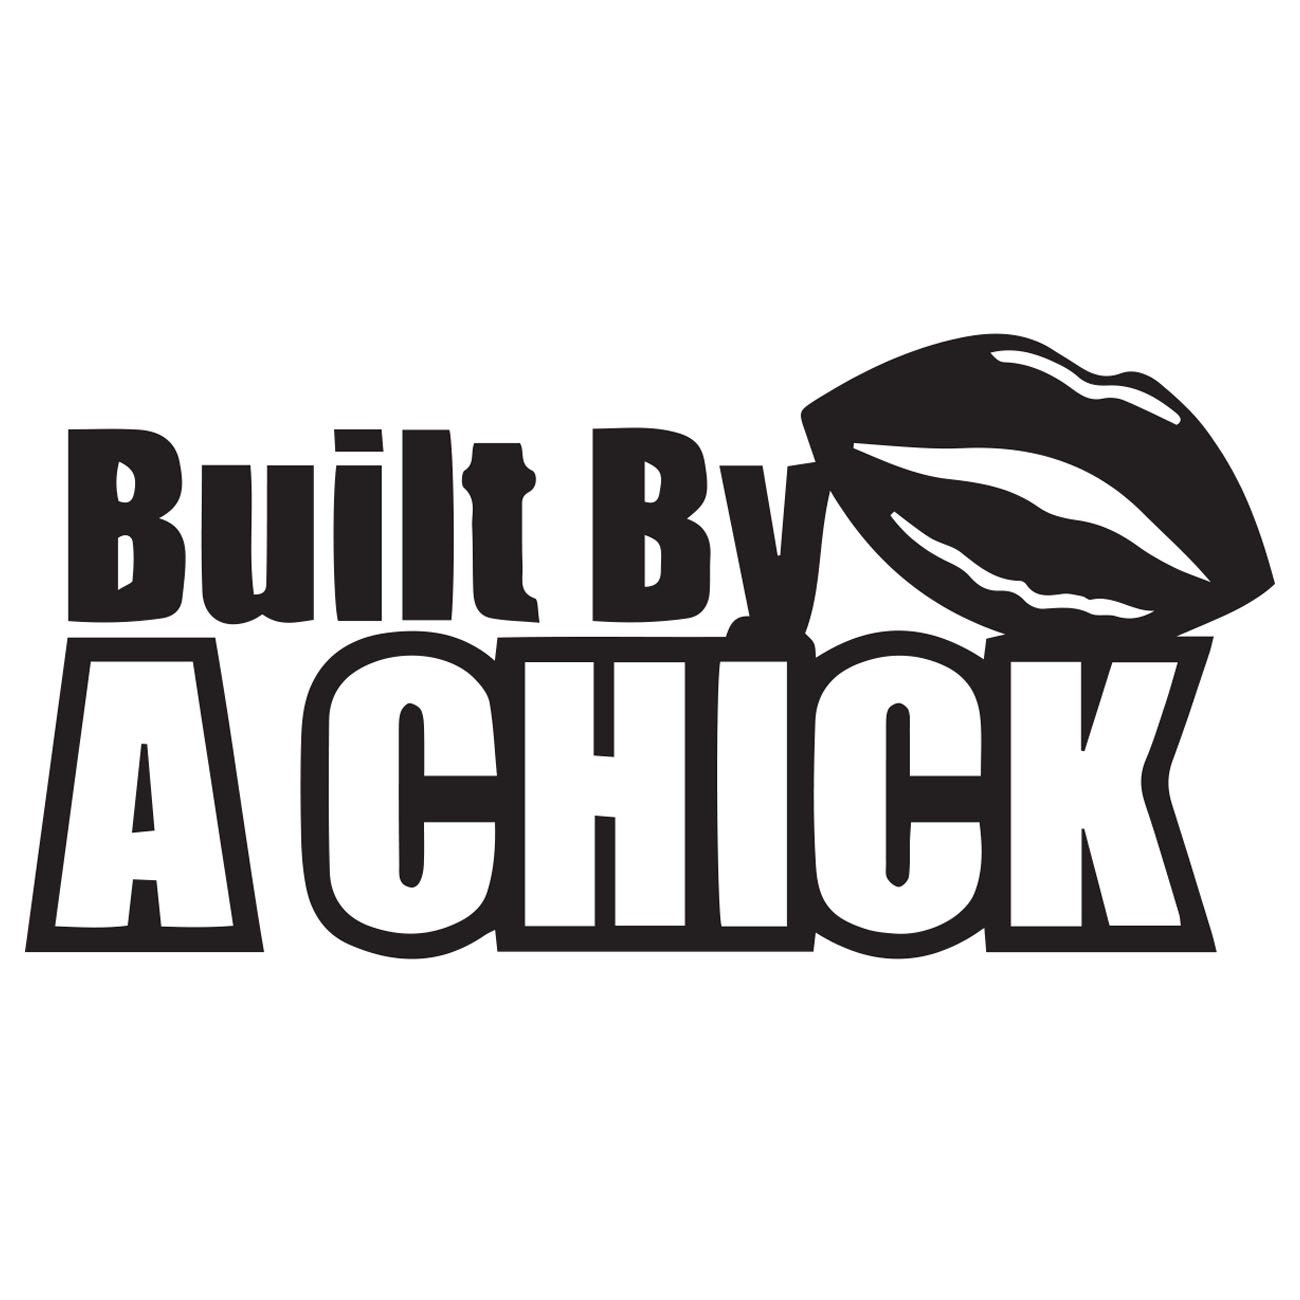 Built by a chick